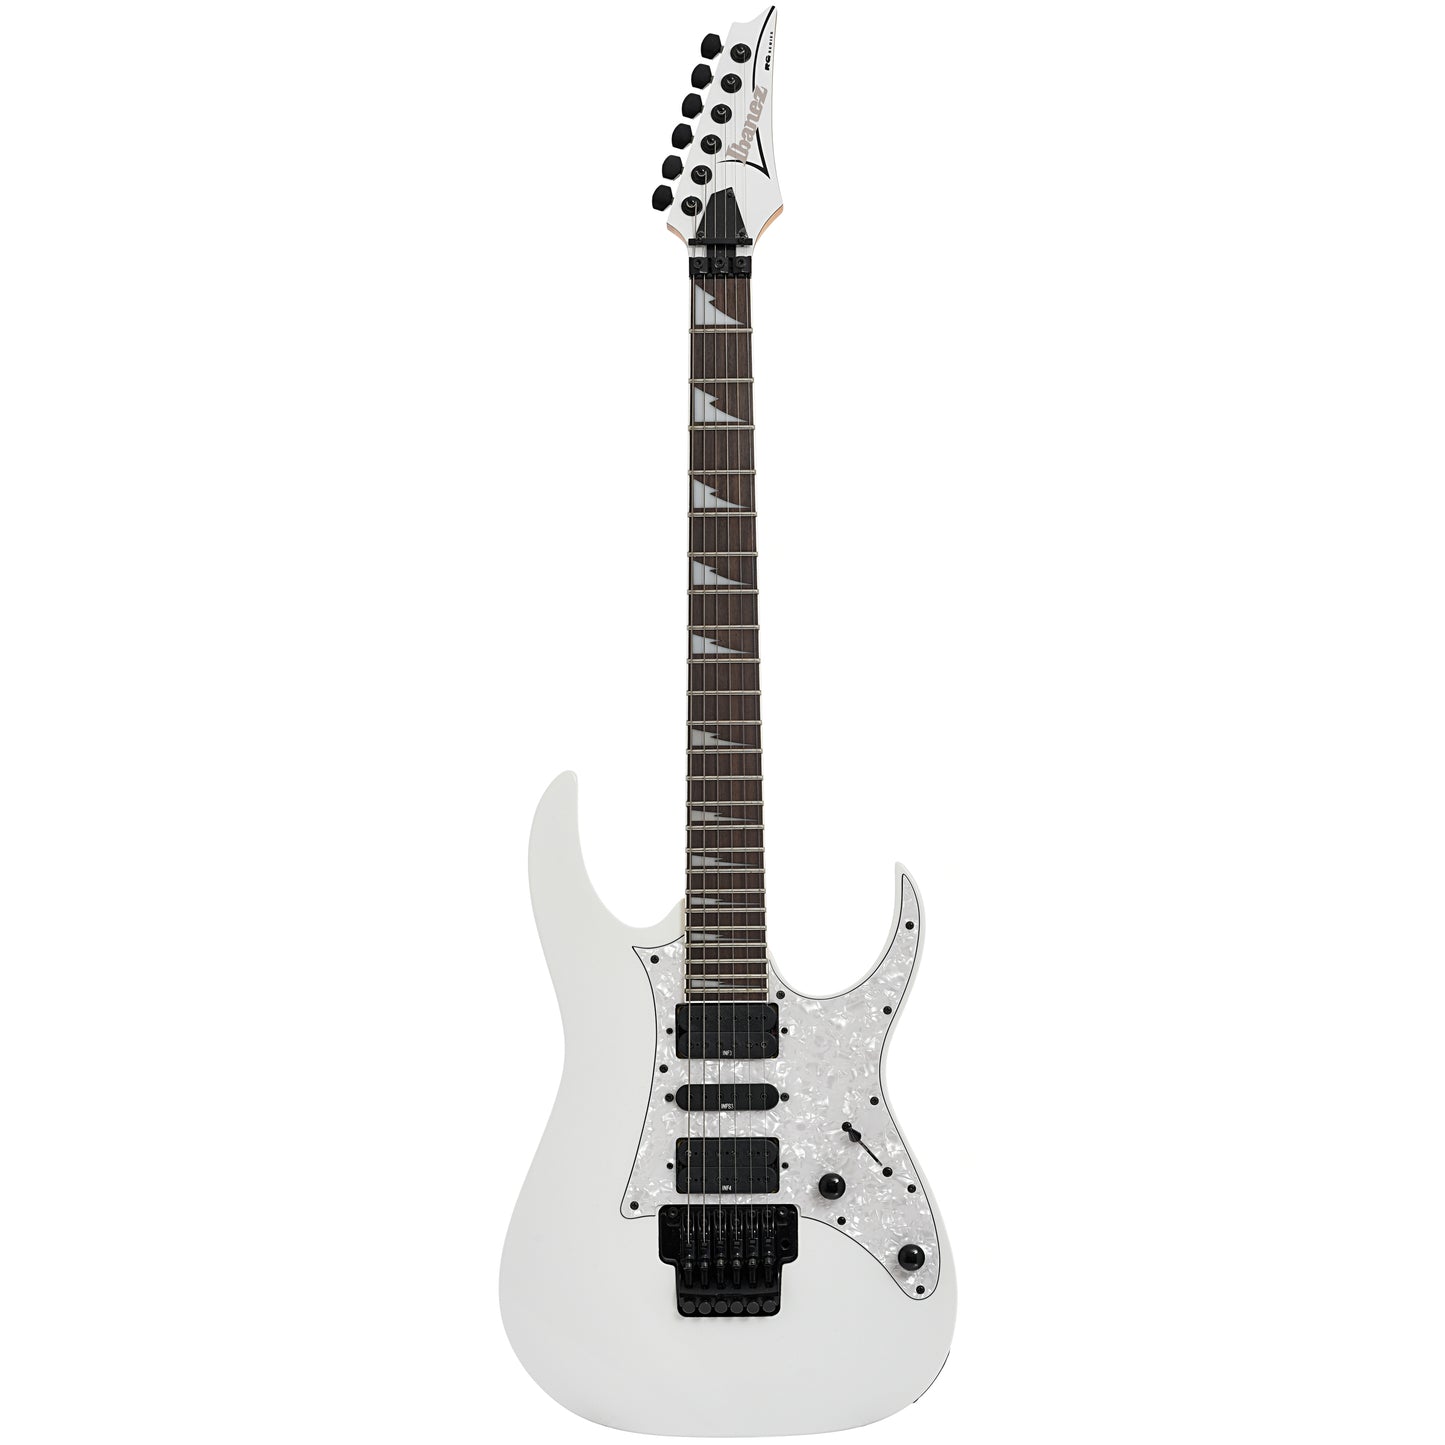 Full front of Ibanez RG-350 Deluxe Electric Guitar 